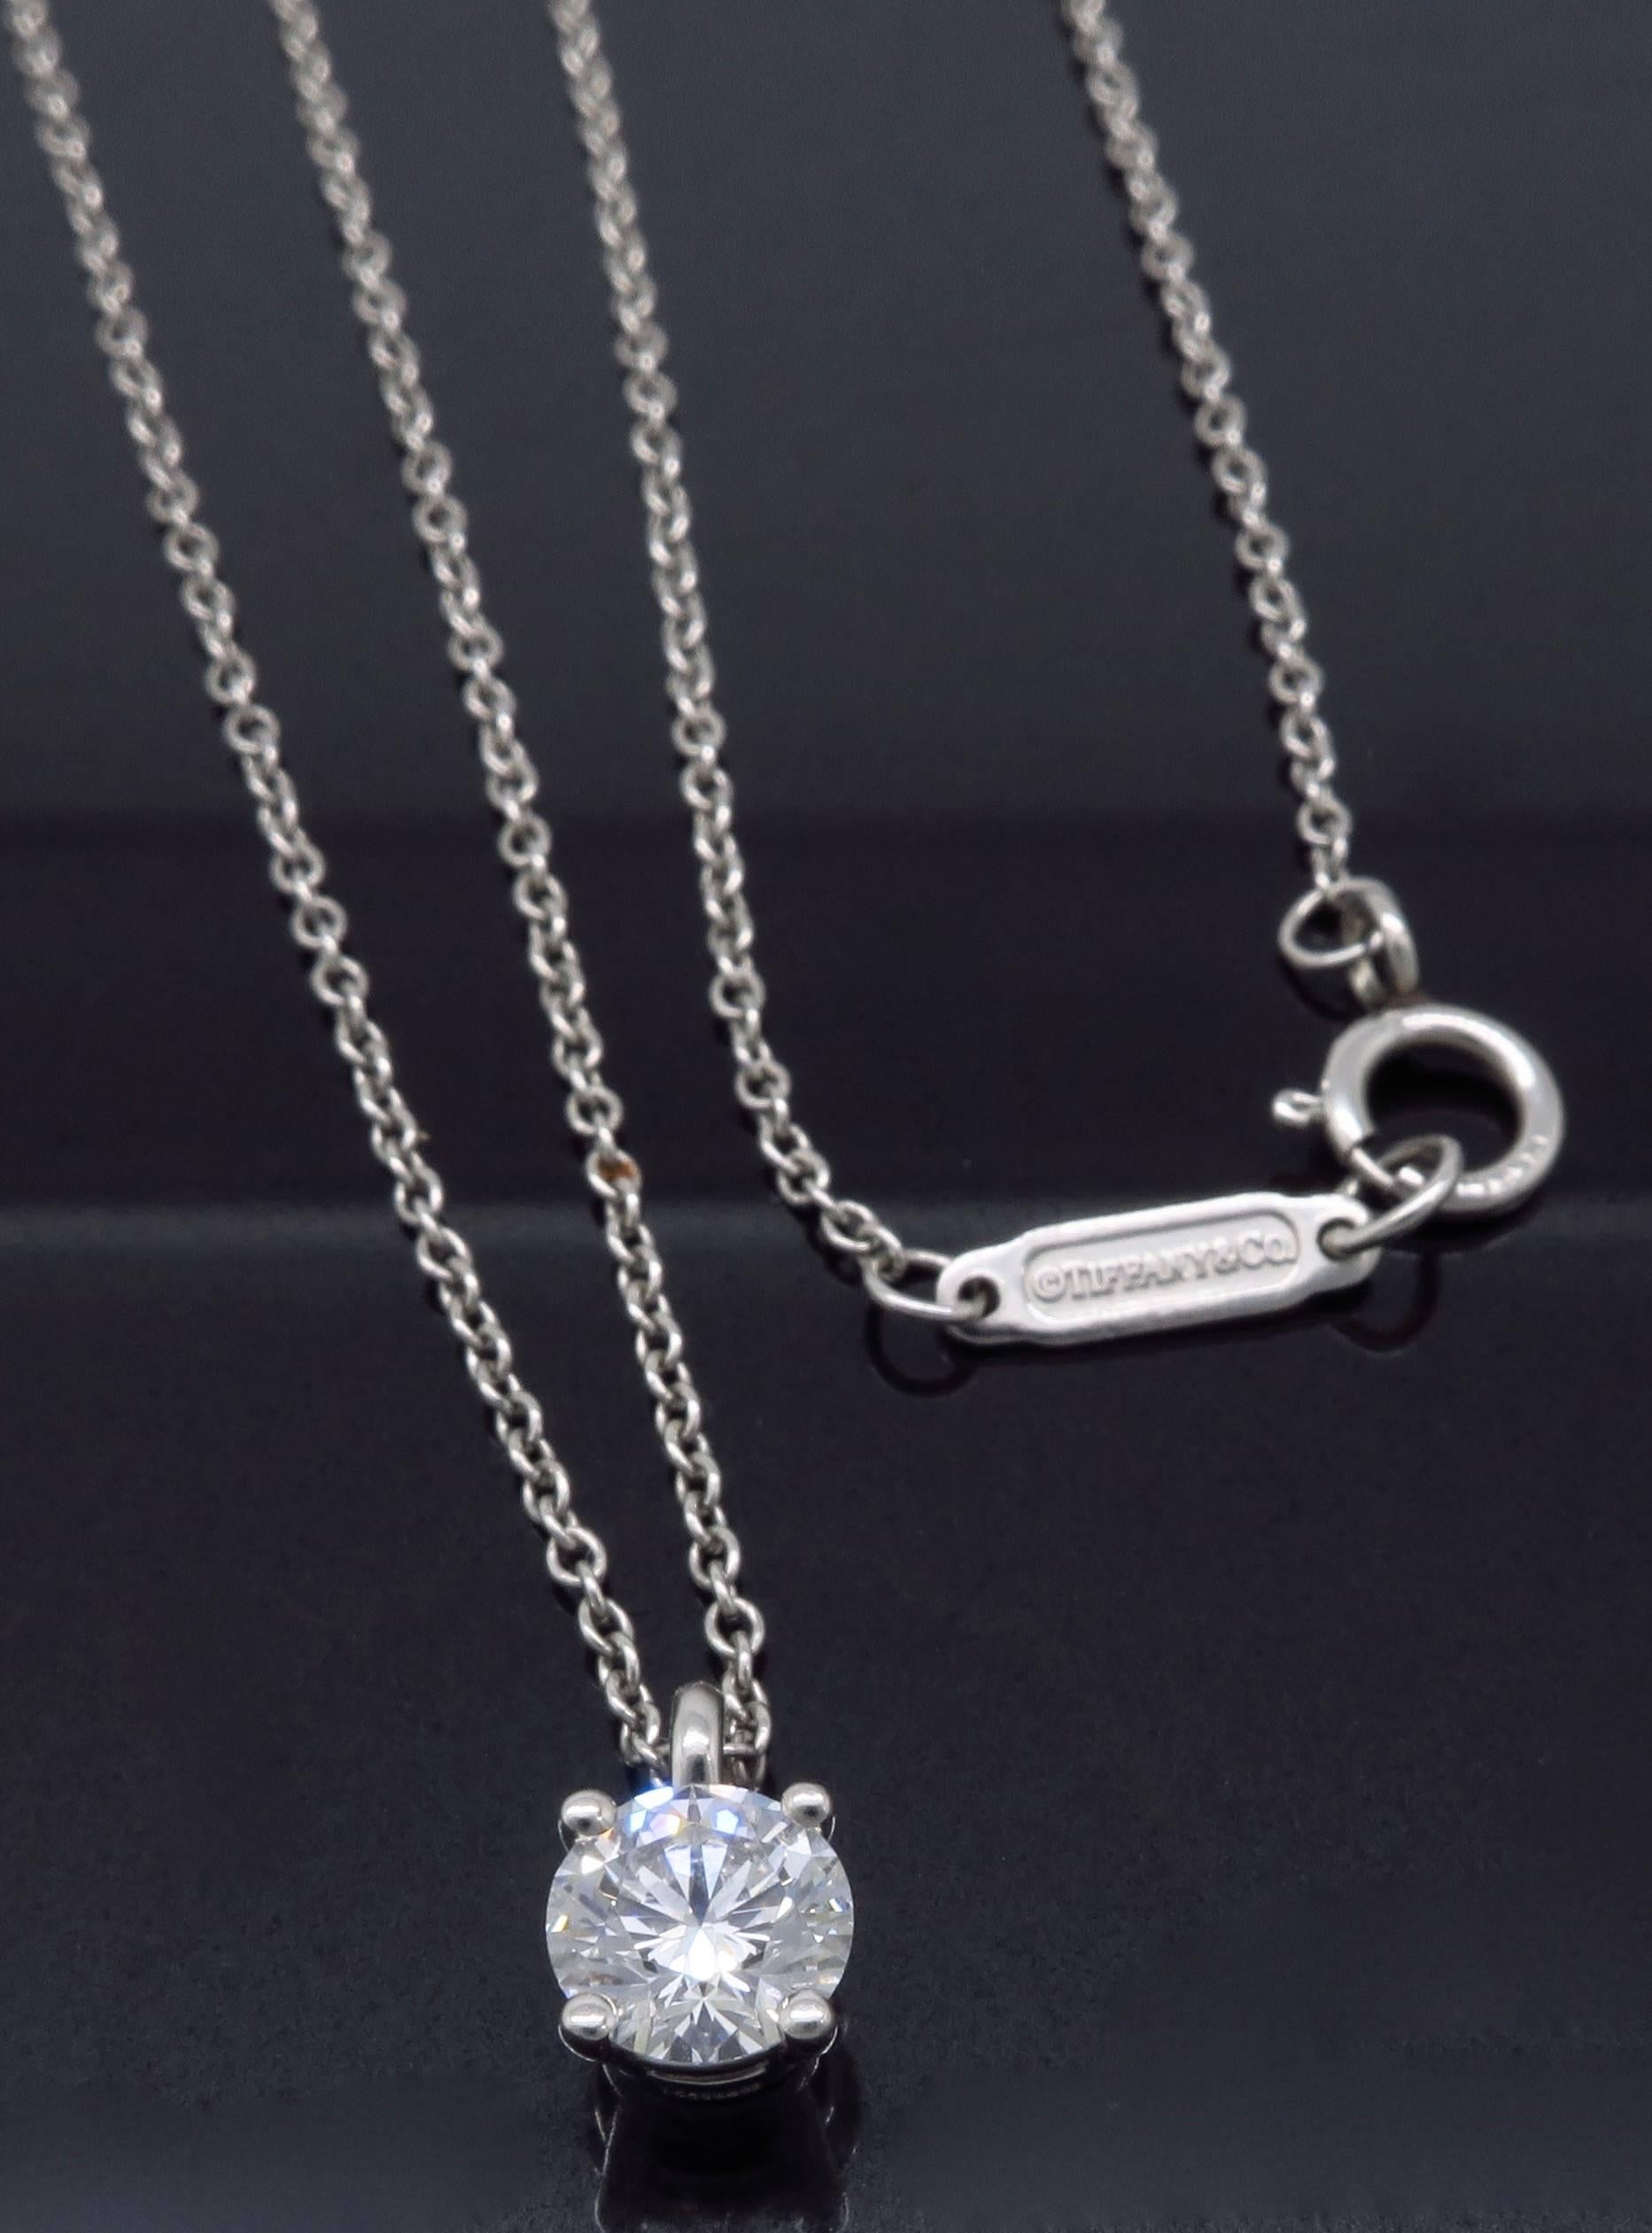 Platinum Tiffany & Co. Diamond Solitaire Pendant features a .45CT Round Brilliant Cut Diamond with F color, VVS1 clarity. The platinum necklace is 16” in length and weighs 2.8 grams.